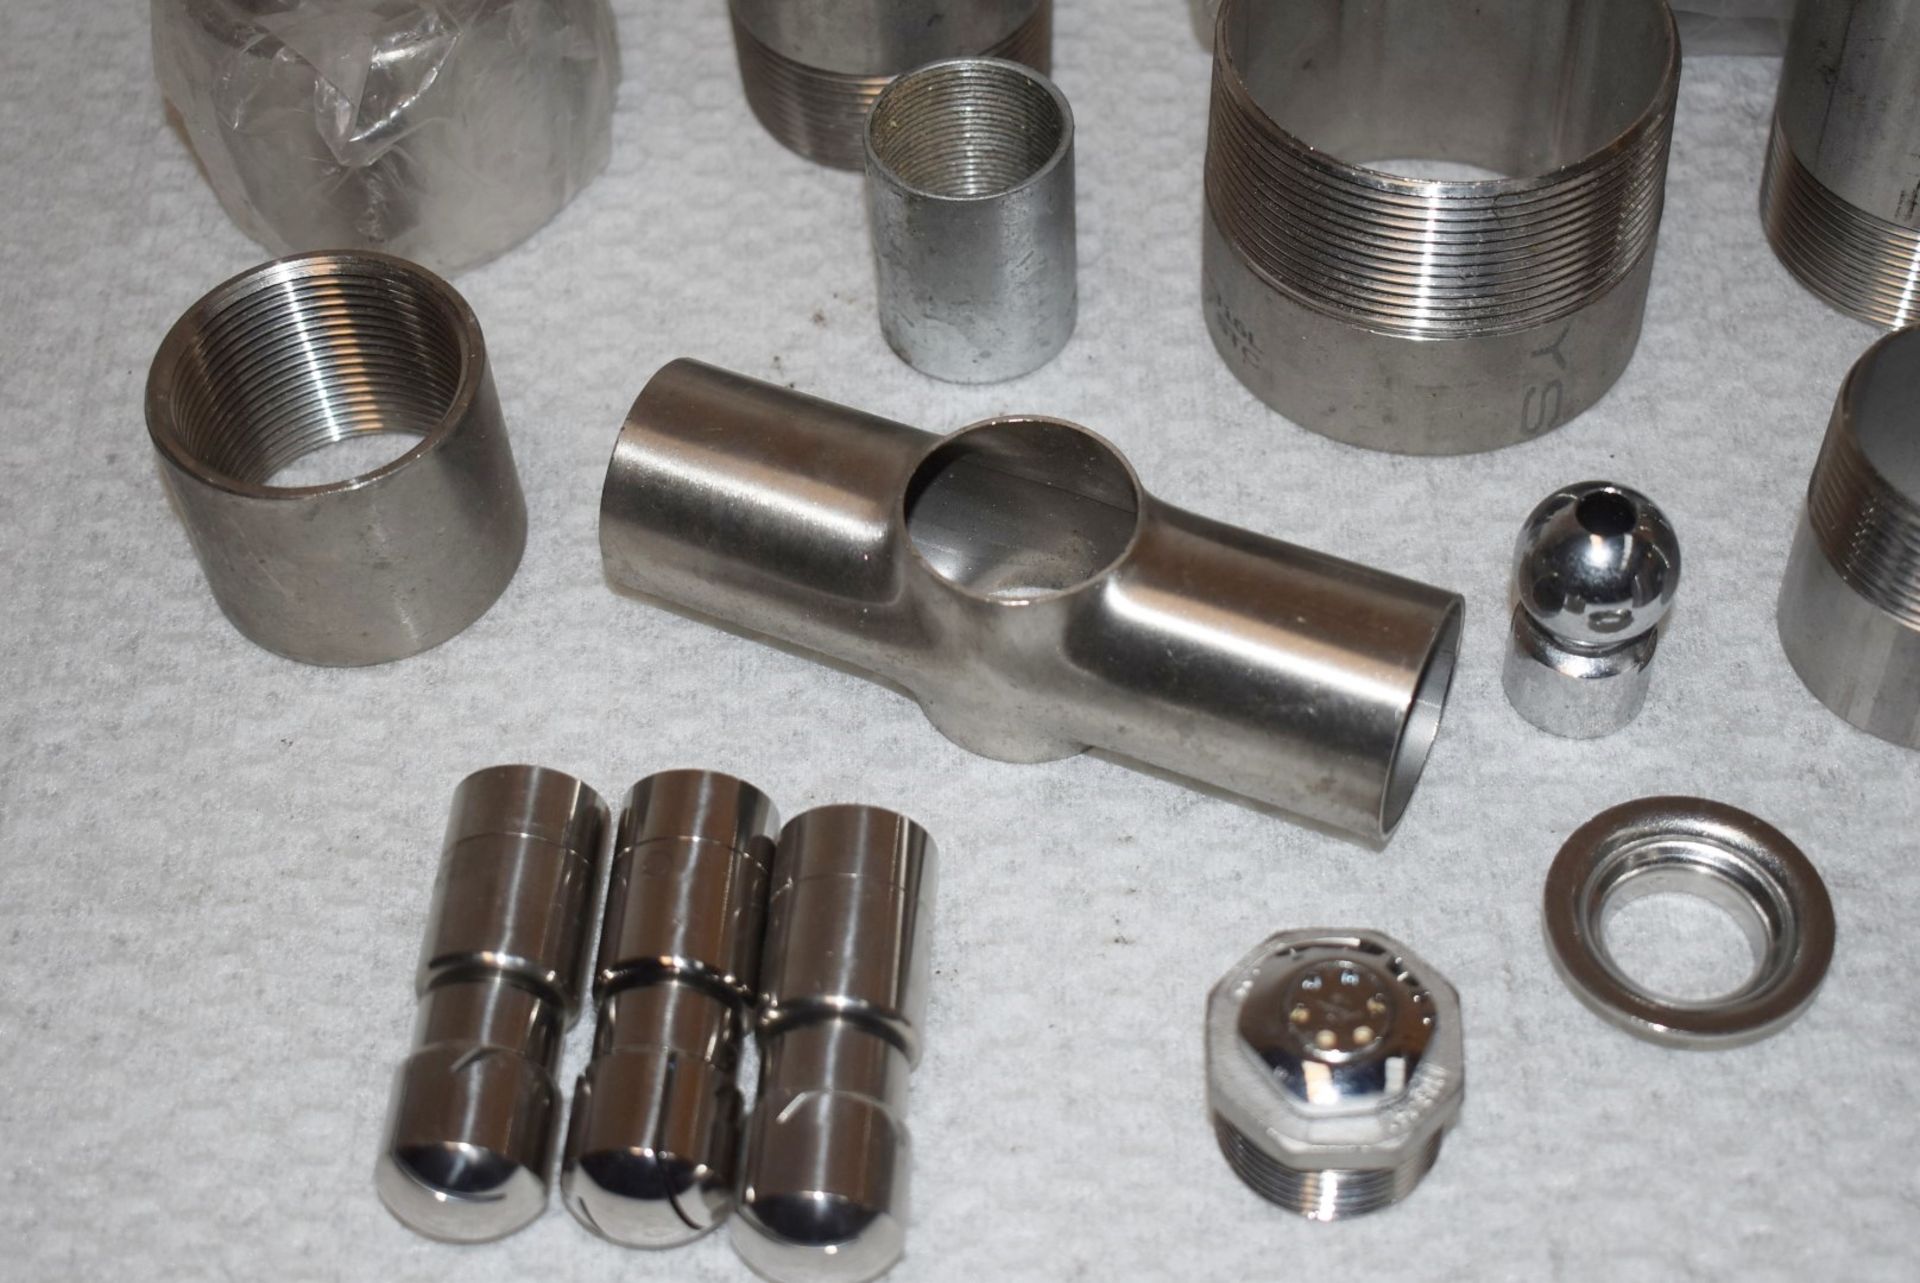 Assorted Job Lot of Stainless Steel Fittings For Brewery Equipment - Includes Approx 30 Pieces - - Image 6 of 10